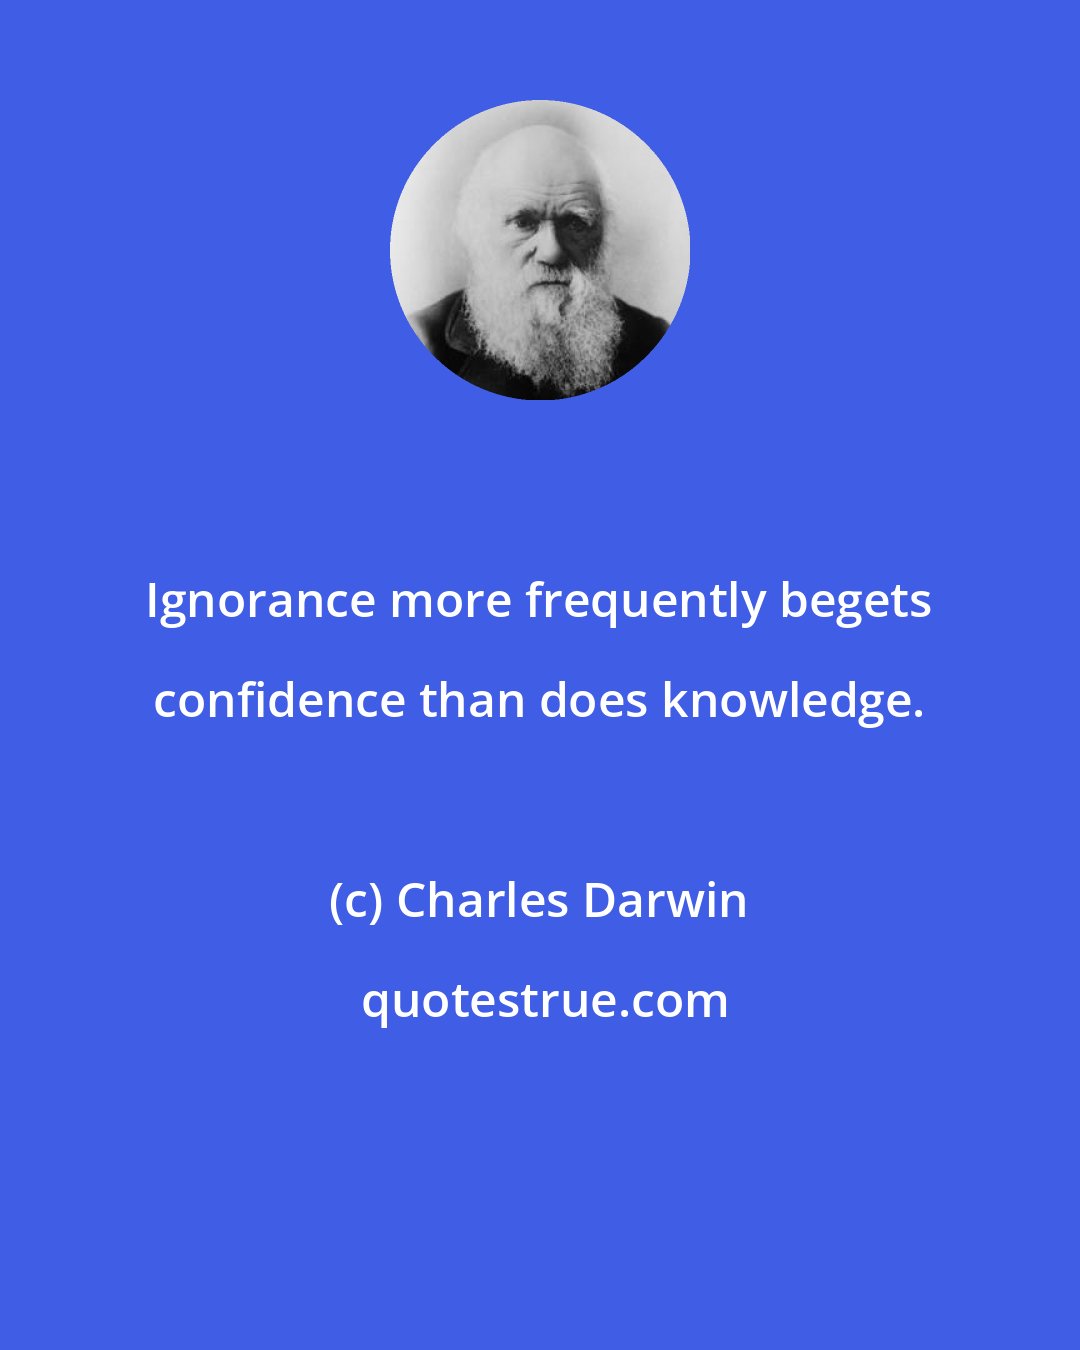 Charles Darwin: Ignorance more frequently begets confidence than does knowledge.